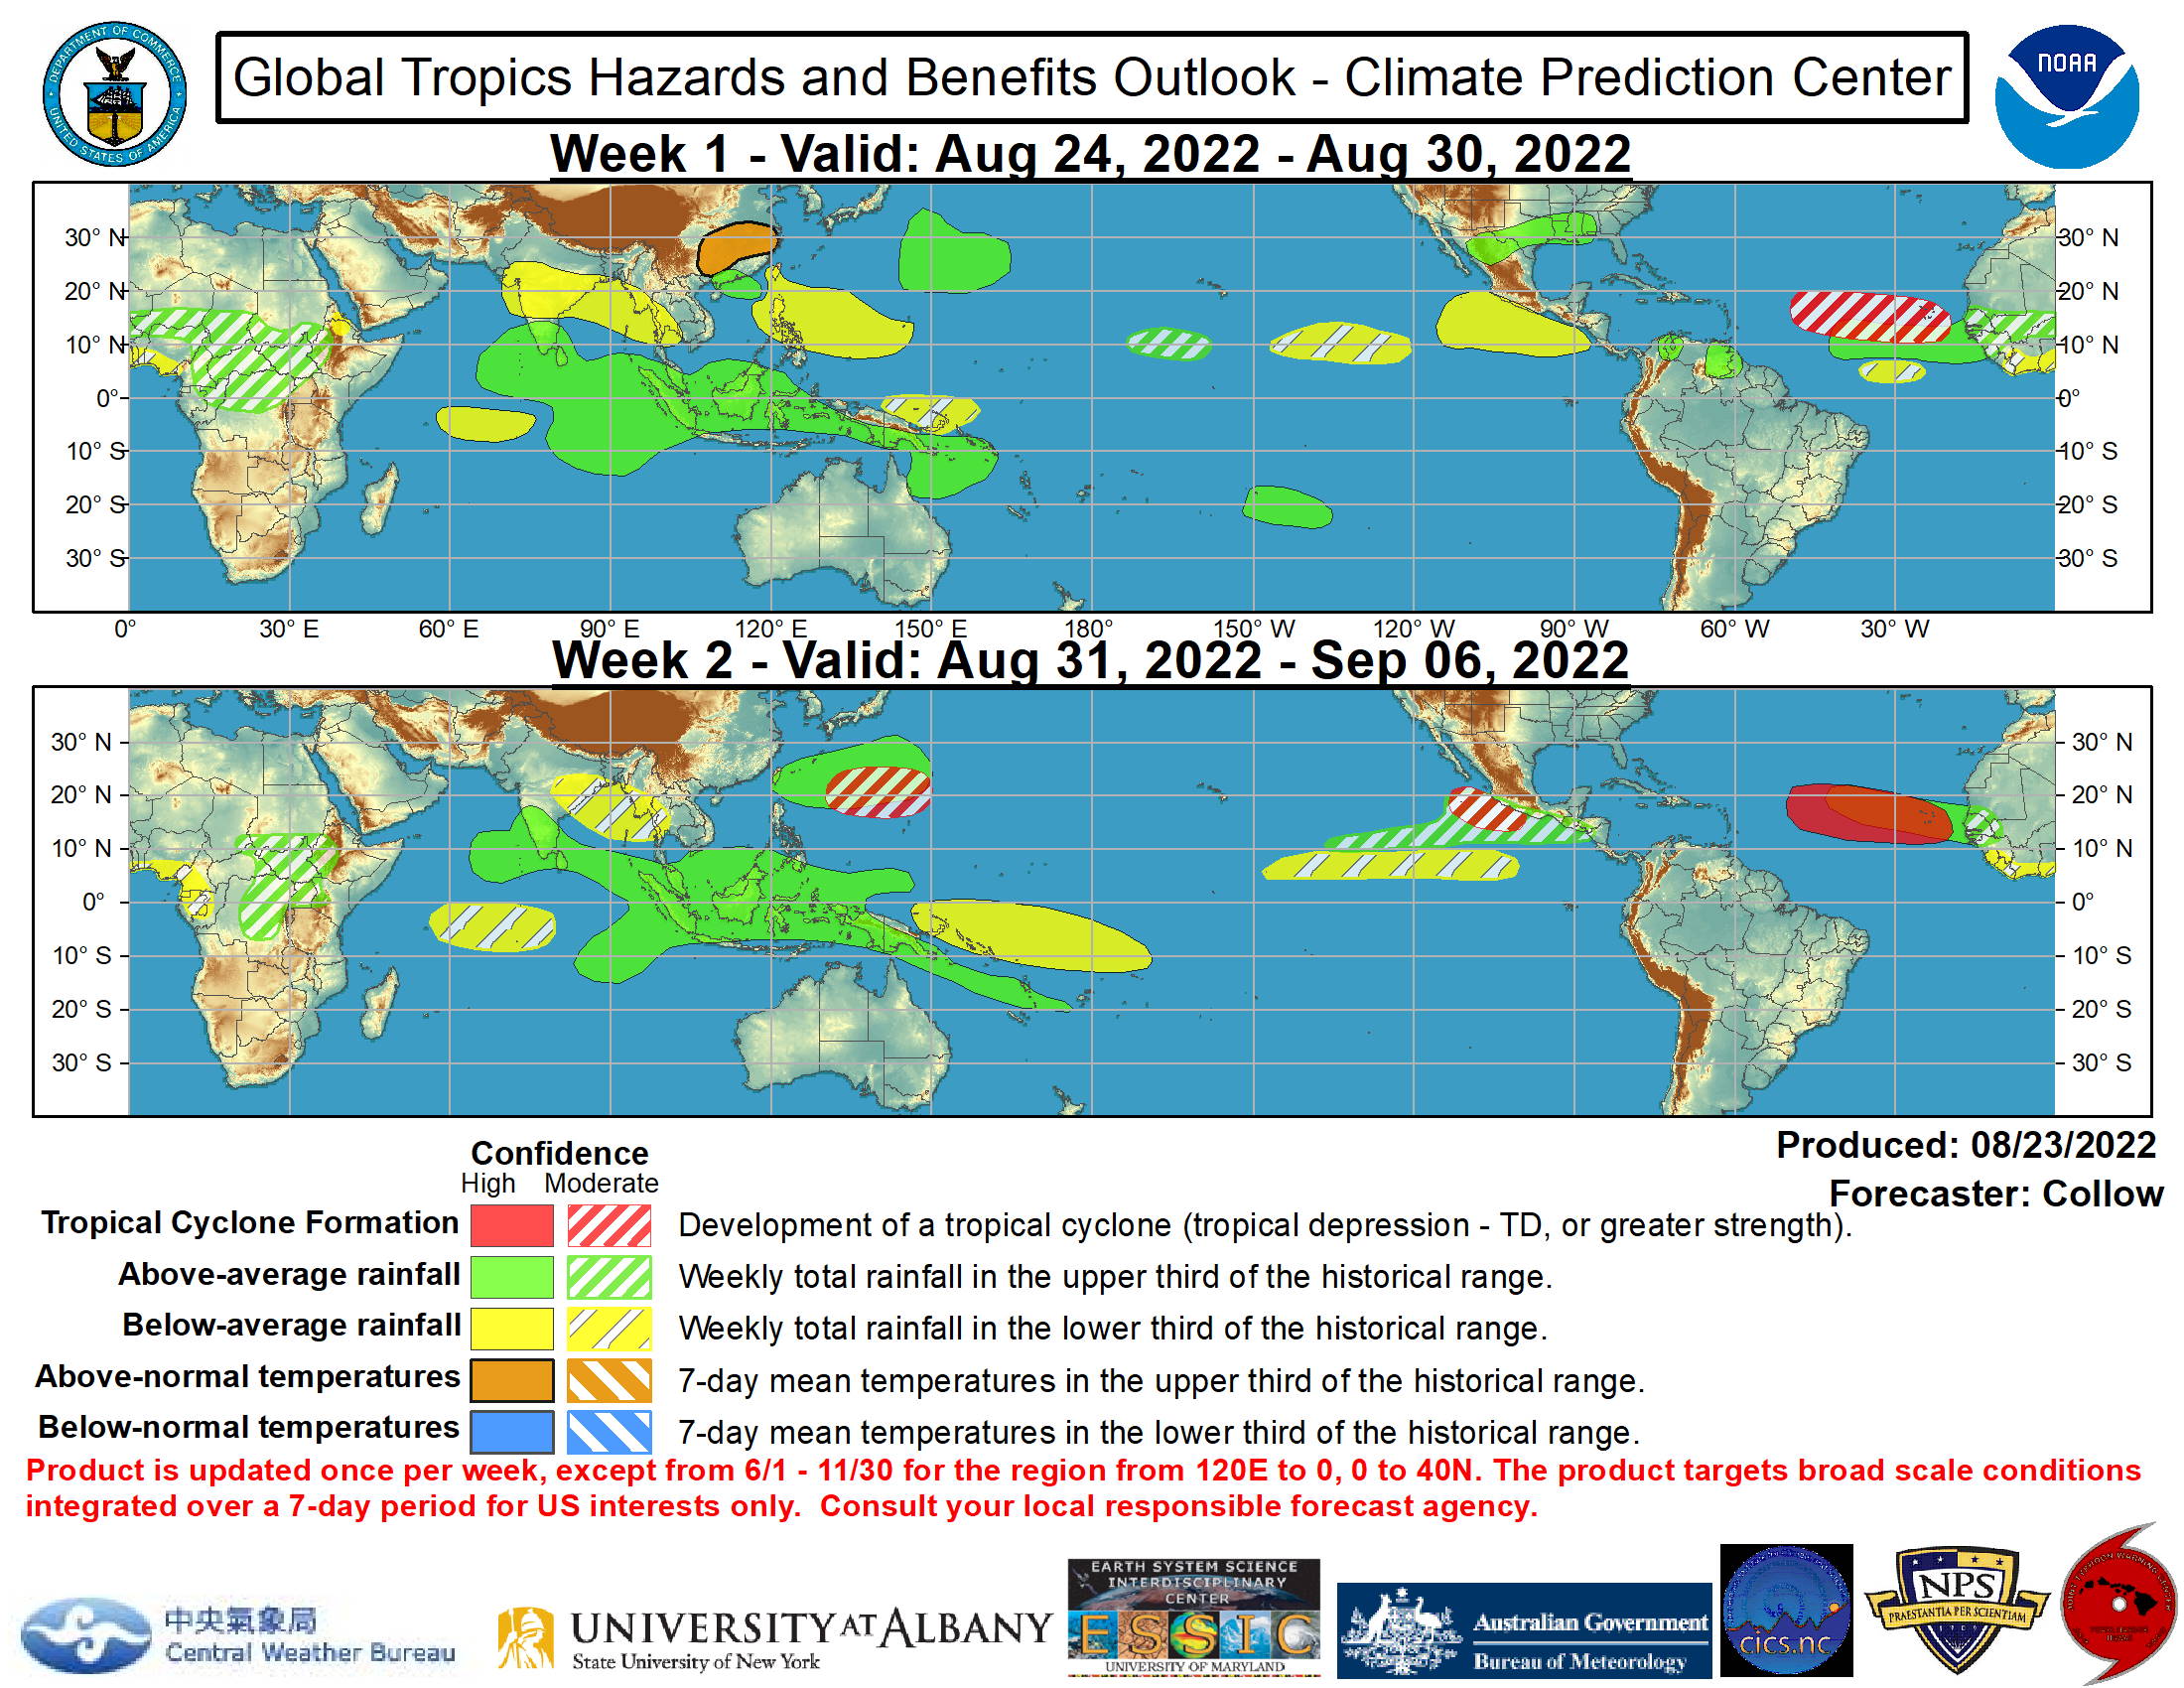 Global Tropics Hazards and Benefits Outlook Discussion Last Updated: 08.23.22 	Valid: 08.24.22 - 09.06.22 The Madden Julian Oscillation (MJO) has remained weak for much of August, with the low frequency La Nina base state being the dominant signal across the tropics. Increased Convectively-Coupled Kelvin Wave (KW) activity has led to an increase in convection across Africa, with easterly waves beginning to emerge into the Atlantic. This area of enhanced convection is forecast to consolidate across Africa and the Indian Ocean, along with a slowing of the phase speed, becoming more consistent with a renewed MJO event. Both the ECMWF and GEFS ensembles indicate an enhanced MJO signal shifting from the Indian Ocean toward the Maritime Continent during the next 2 weeks. The eastward extent of the propagation as well as the amplitude are uncertain given the background La Nina state, with the GEFS more robust compared to the ECMWF and JMA ensembles.  A tropical cyclone (TC) developed over the Bay of Bengal (04B) on 8/19 and impacted eastern India. Two TCs also formed over the West Pacific this past week. Tropical Storm Ma-on developed on 8/20 over the Philippine Sea, made landfall over the northern Philippines, and is forecast to track west-northwestward, impacting southeastern China at typhoon strength later this week. Typhoon Tokage developed on 8/21 to the east of Japan. It is forecast to recurve northeastward over the northwest Pacific, remaining offshore of Japan. The suppressed convective envelope across the Pacific tied to La Nina favors a reduction in TC activity across the entire Pacific during the next week. By week-2 TC activity may begin to increase across the Pacific as the MJO becomes more active across the Maritime Continent and the suppressed convection weakens across the Pacific. Therefore, moderate confidence (40 percent chance) areas for TC development are indicated over both the western and eastern Pacific basins during week-2.  The Atlantic Basin is forecast to become more active as the peak of the Atlantic Hurricane Season approaches. The National Hurricane Center (NHC) is currently monitoring two tropical disturbances over the east-central Atlantic. Development probabilities for the lead wave have decreased over the past few days, and a second wave behind the first is currently given a 20 percent chance of TC development in the next 5 days, with easterly waves forecast to continue to emerge off of Africa later in week-1 and into week-2. For this reason, a moderate confidence (40 percent chance) area of TC formation is depicted across the central and eastern portions of the Main Development Region of the Atlantic for week-1, and a high confidence area (70 percent chance) is depicted for week-2 when easterly wave activity is forecast to peak. There is also some potential for TC development beginning to emerge in the GEFS and ECMWF ensembles across the Caribbean or southern Gulf of Mexico, with NHC indicating a 20 percent chance of TC development over the eastern Caribbean in the next 5 days. This is too low to include a related moderate confidence shape in today’s outlook, but interests in these areas are encouraged to consult NHC for the latest updates on this potential.  The temperature and precipitation outlook during the next two weeks is based on a consensus of GEFS, CFS, and ECMWF model solutions, La Nina precipitation composites, and also considerations of an enhanced MJO propagating east from the Indian Ocean to the Maritime Continent. Later in week-2, the MJO may begin to constructively interfere with the ongoing La Nina, resulting in more widespread enhanced rainfall throughout the Maritime Continent. Anomalously warm temperatures are likely across eastern China during week-1, with maximum temperatures 35-40 deg C forecast before a relatively cooler pattern takes shape in week-2.NOAA